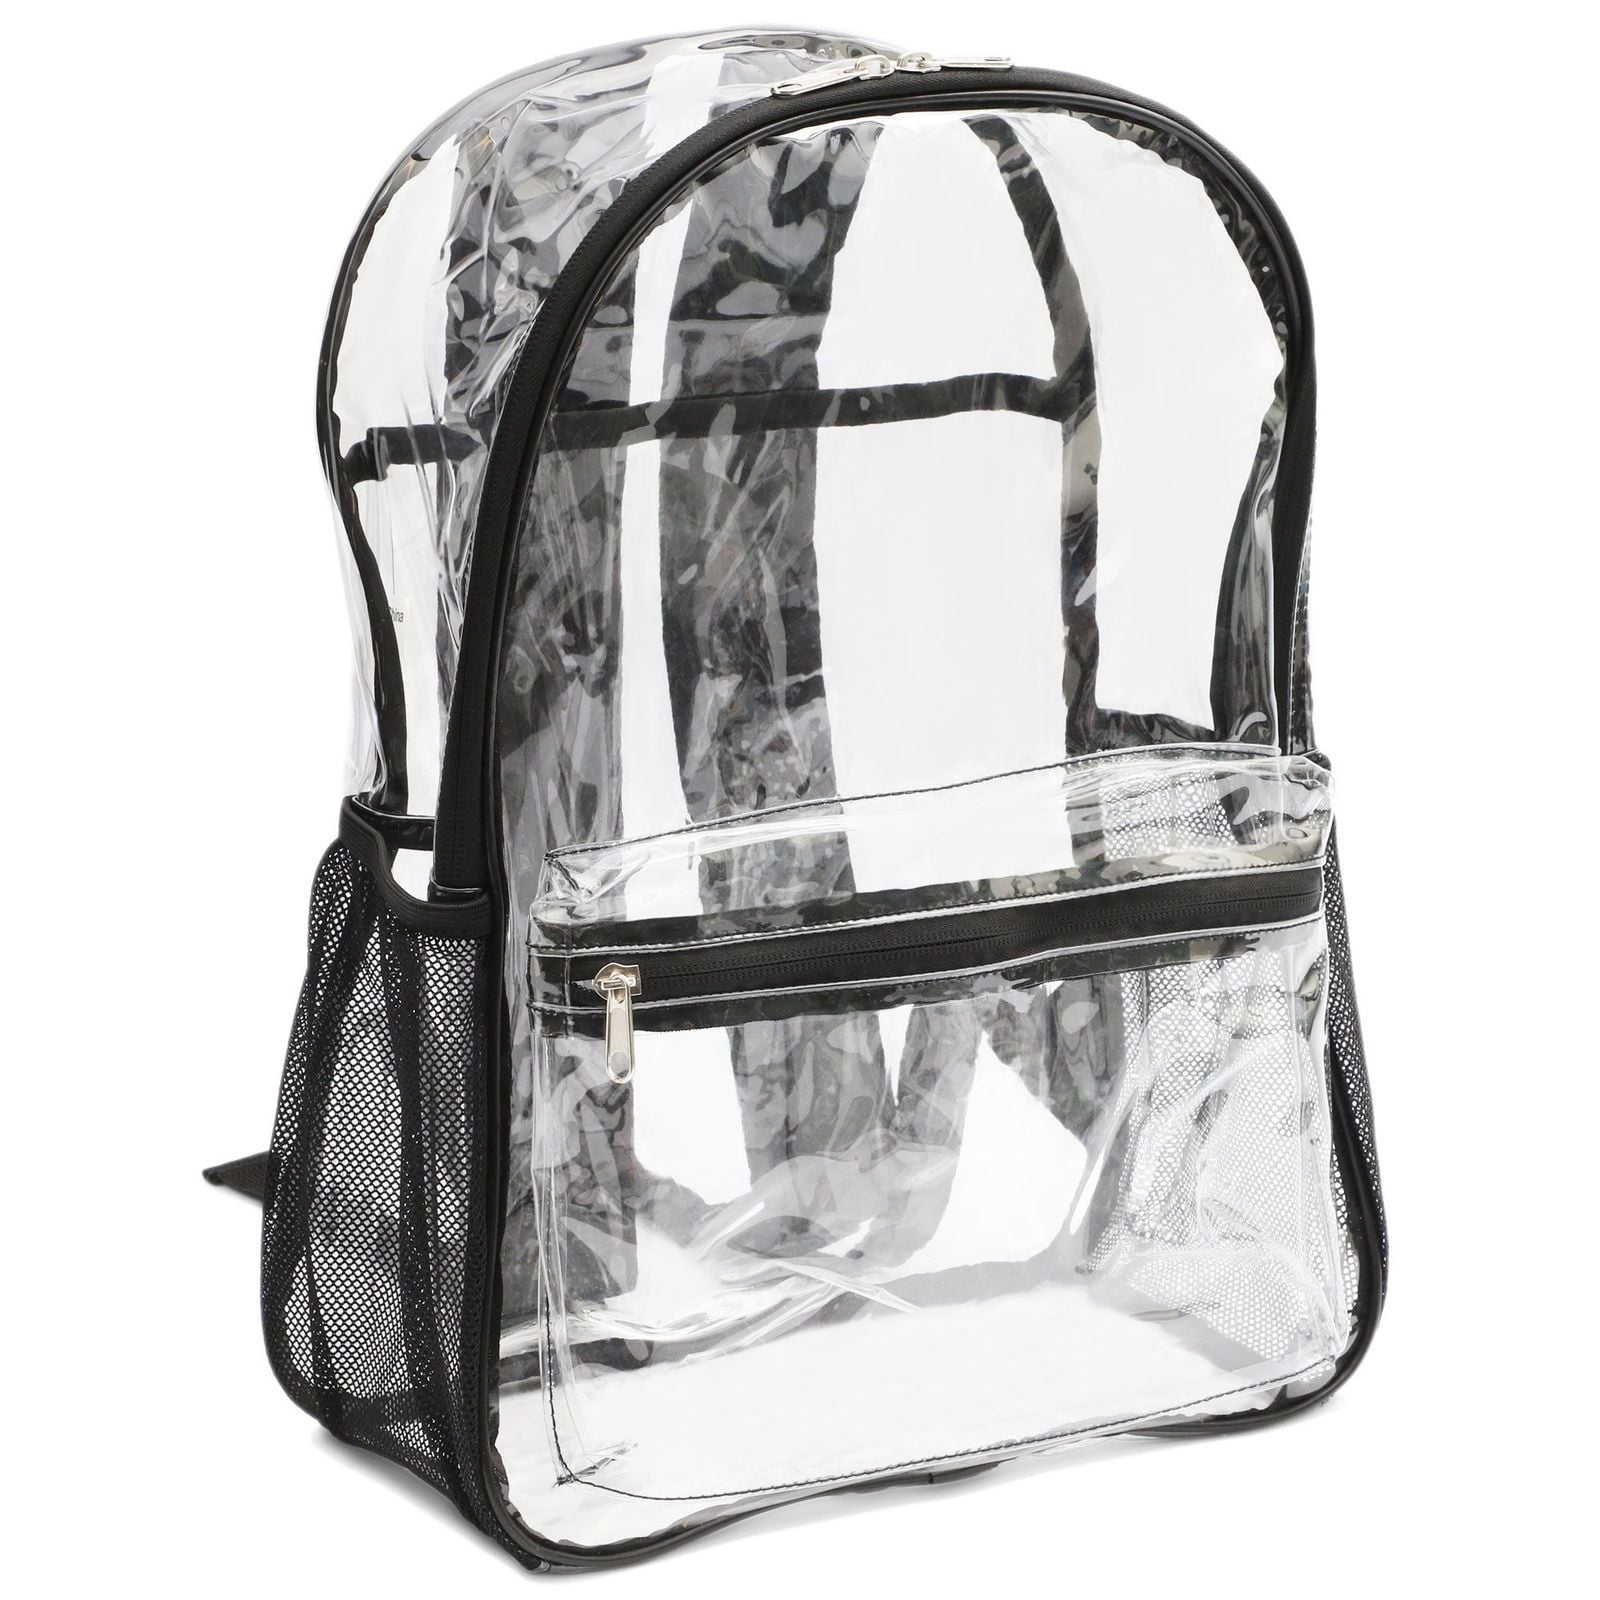 Heavy Duty See Through Backpack Black Clear Backpack Transparent Backpacks Stadium Approved